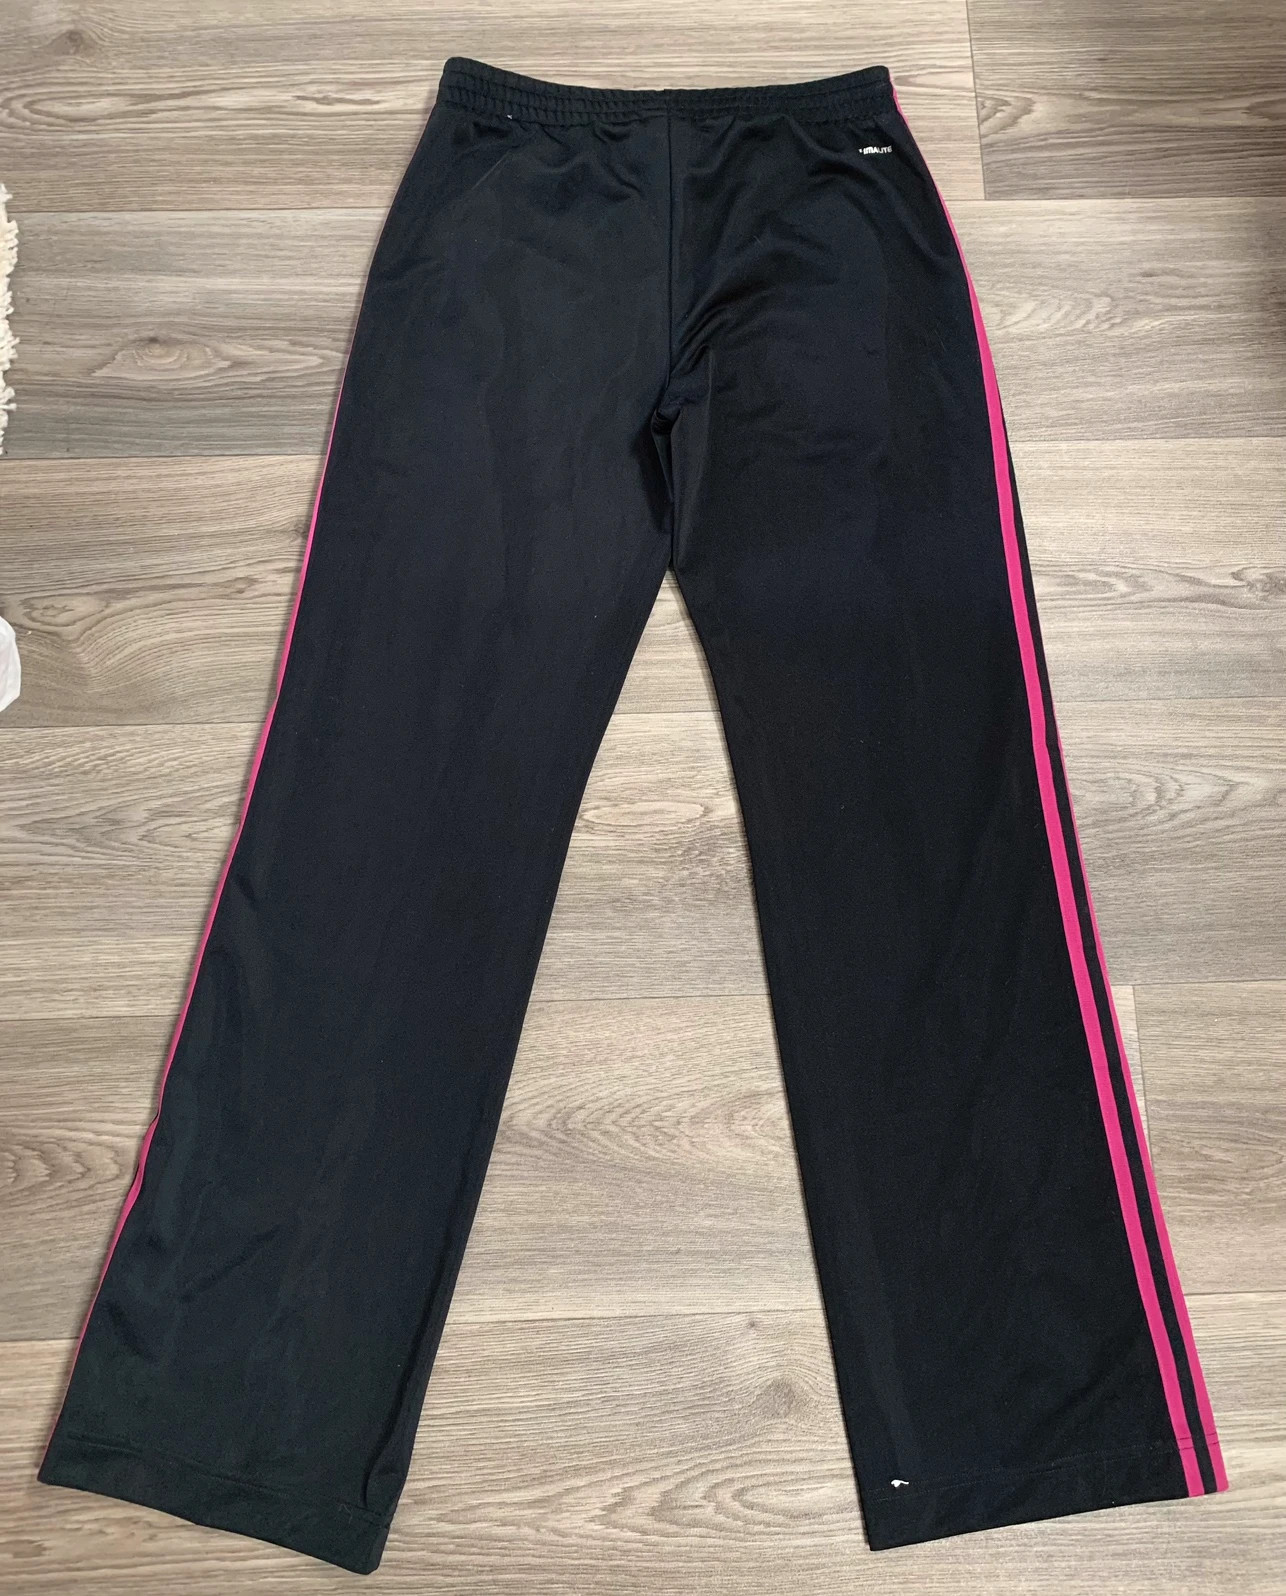 Black with pink stripes adidas wide legged tracksuit bottoms | Vinted